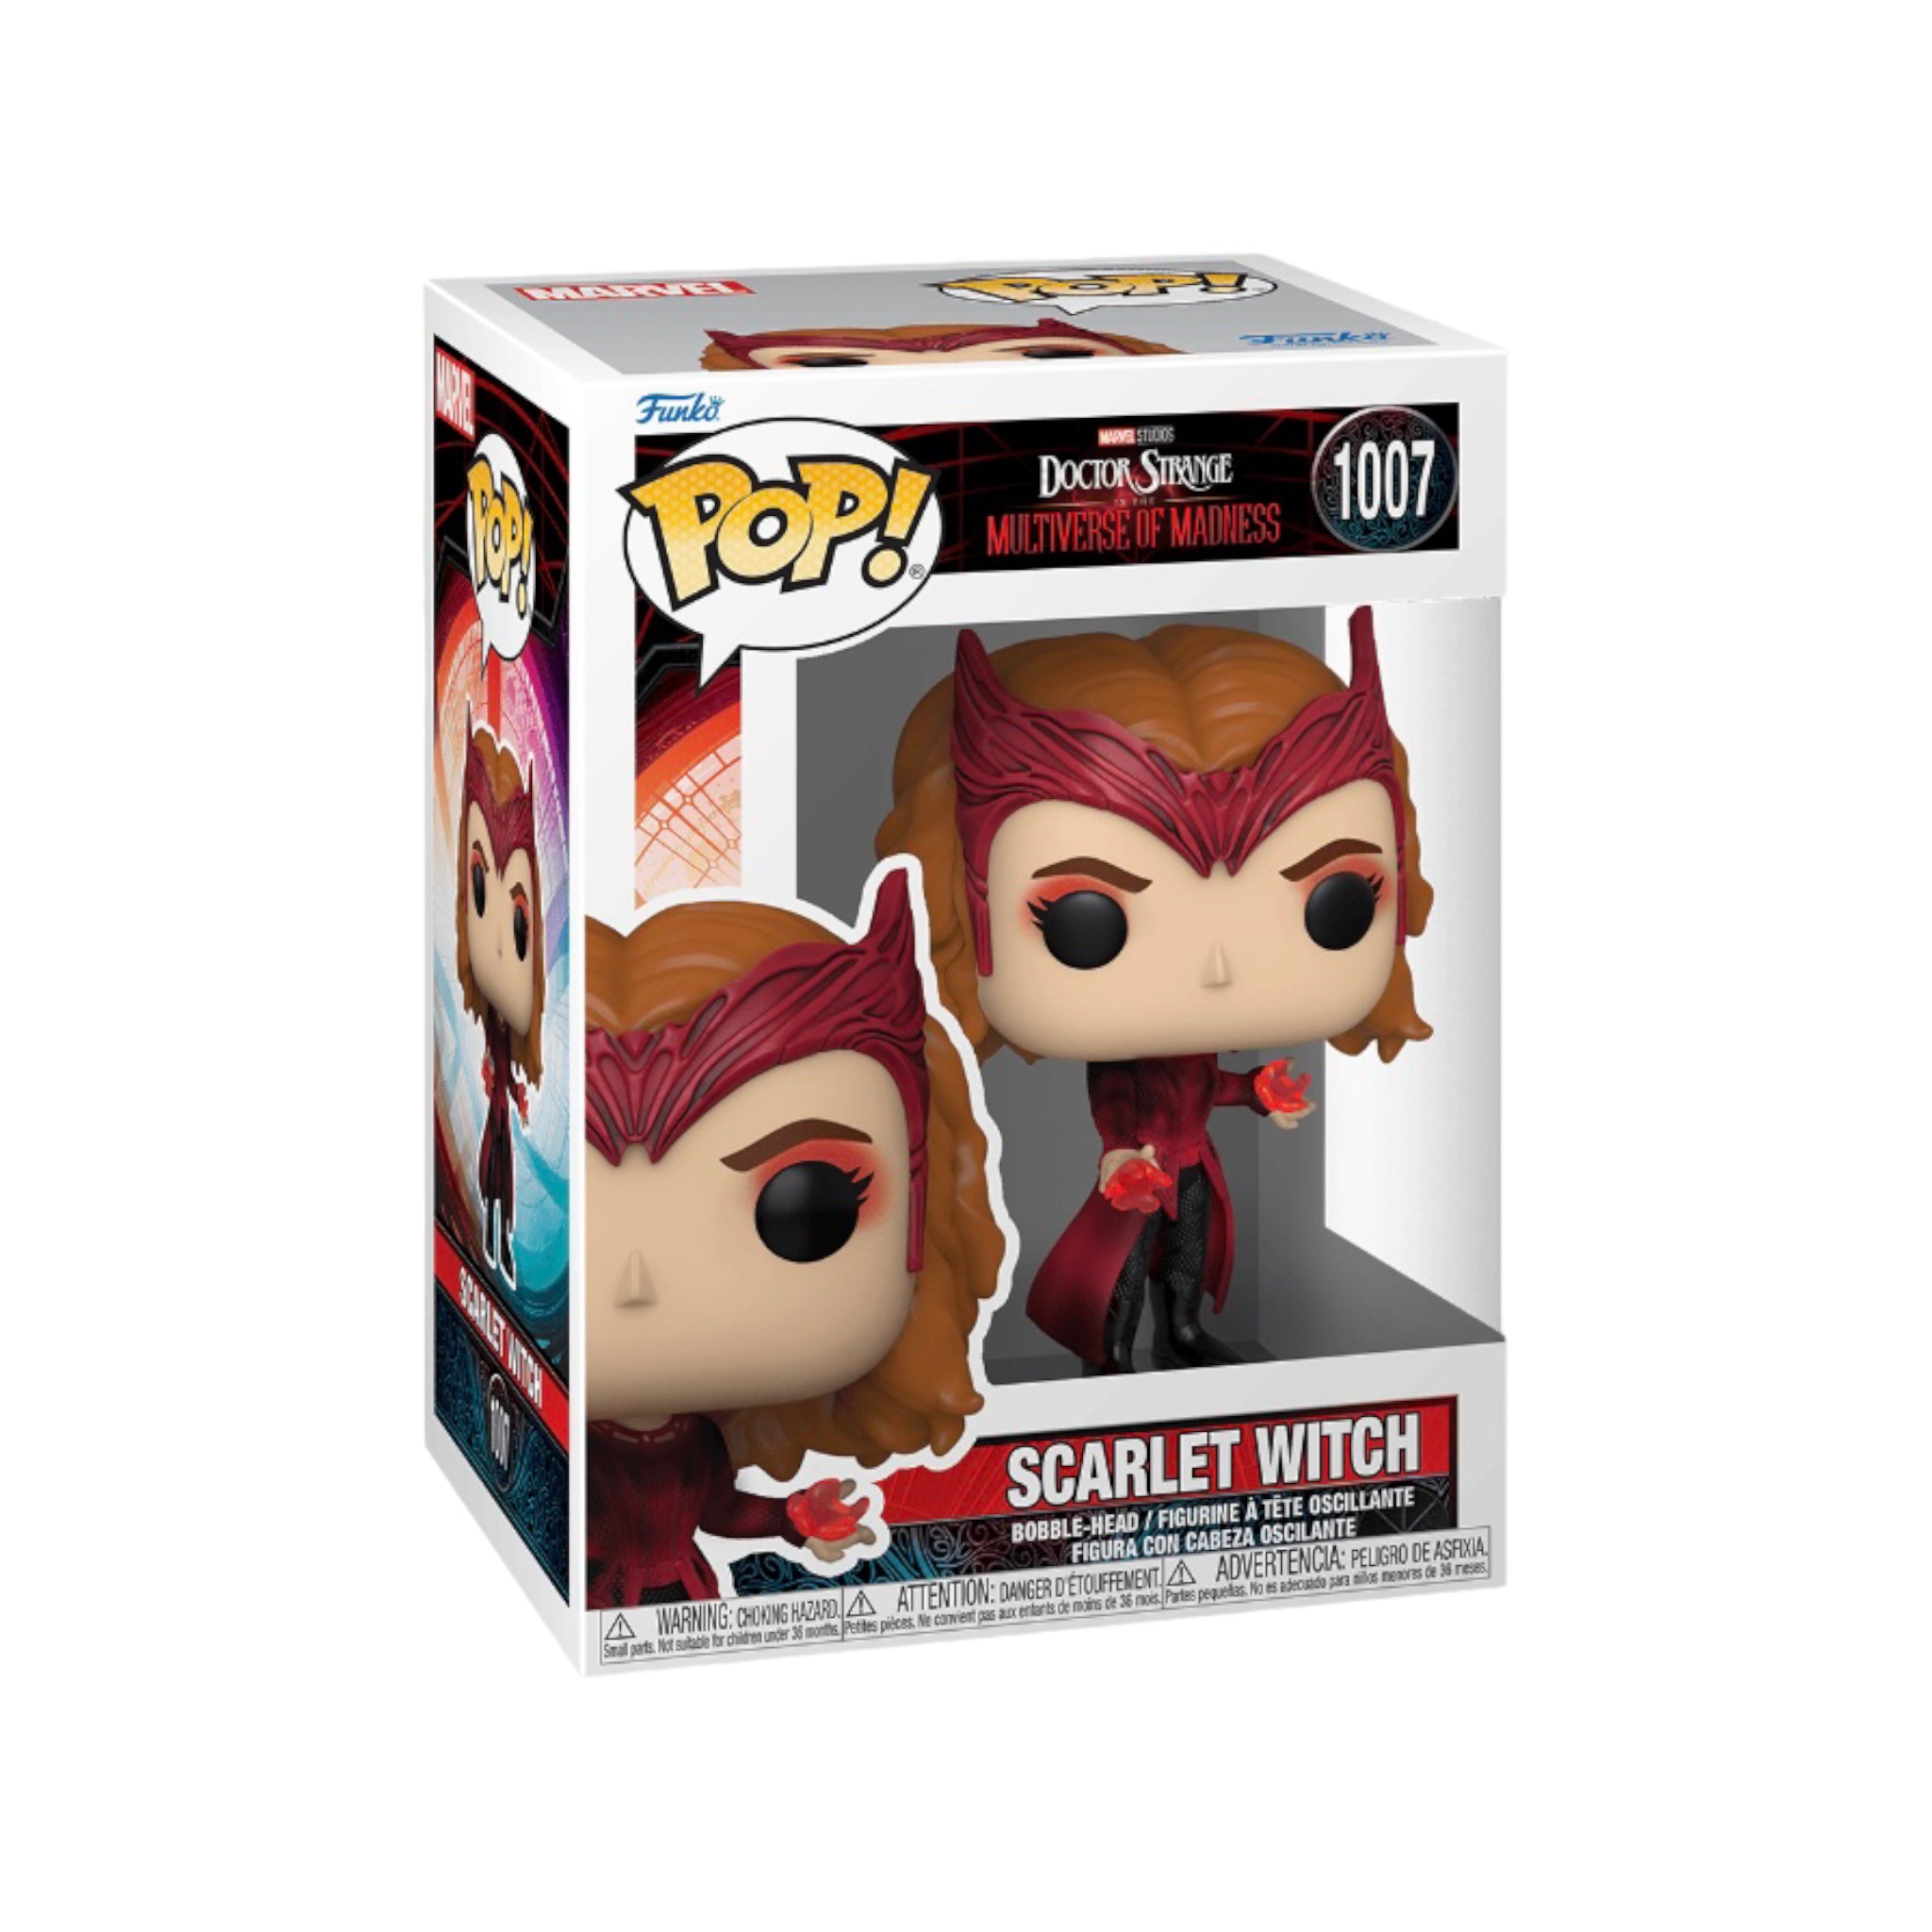 Scarlet Witch #1007 Funko Pop! - Doctor Strange in The Multiverse of Madness